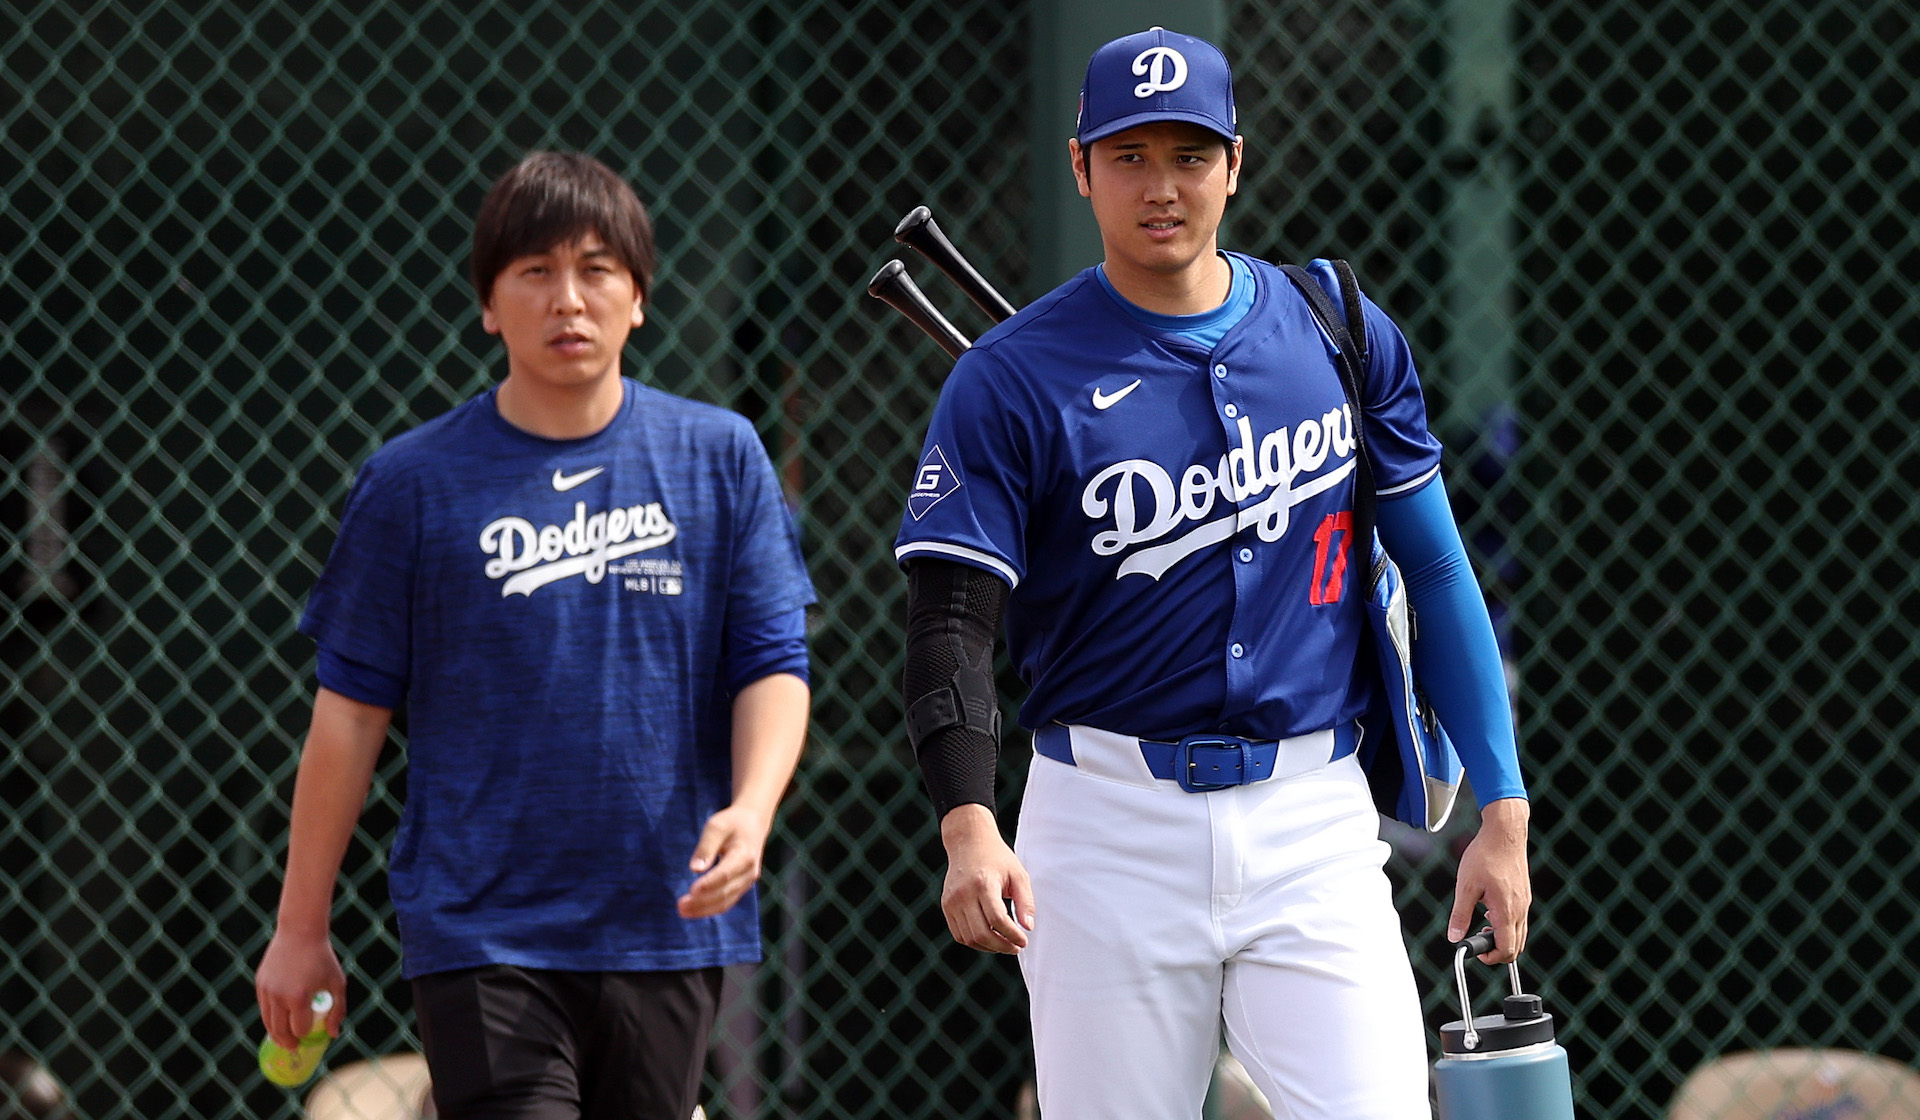 Shohei Ohtani #17 of the Los Angeles Dodgers, pictured with his translator, Ippei Mizuhara, prepares for a game against the Chicago White Sox at Camelback Ranch.